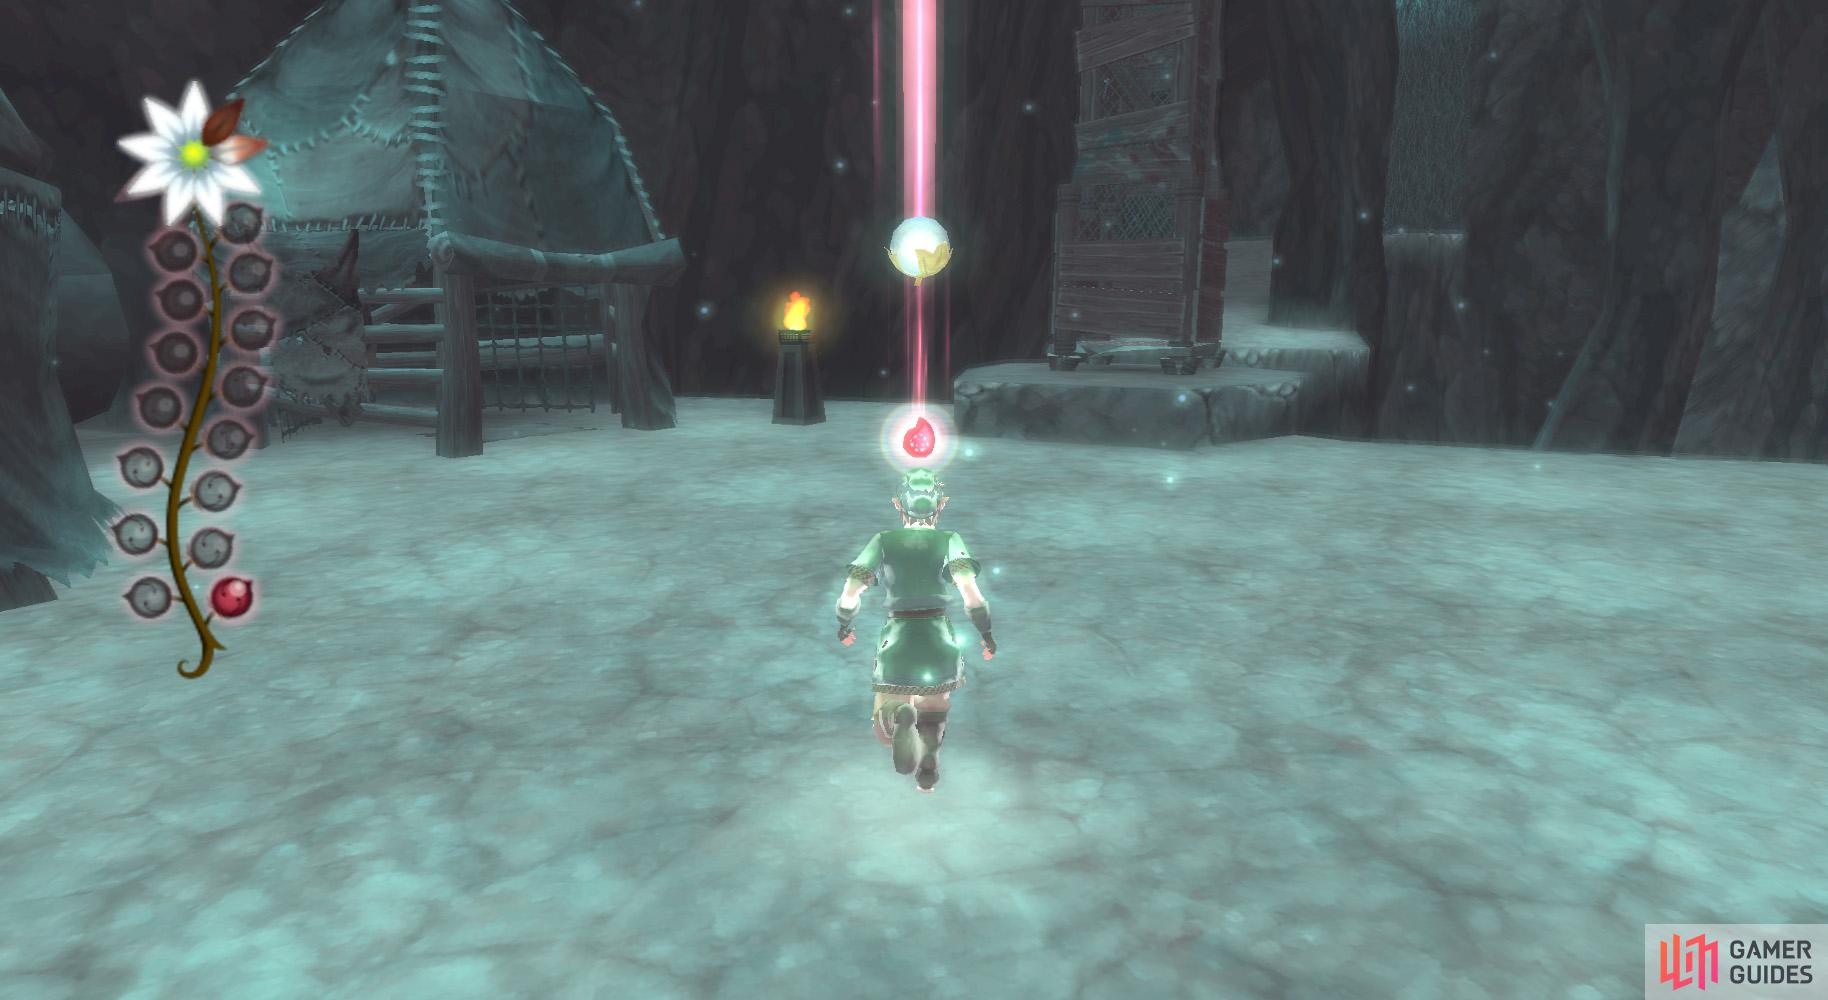 2. Run all the way up the slope to the Bokoblin encampment. Try keeping to the right to avoid most of the Watchers.